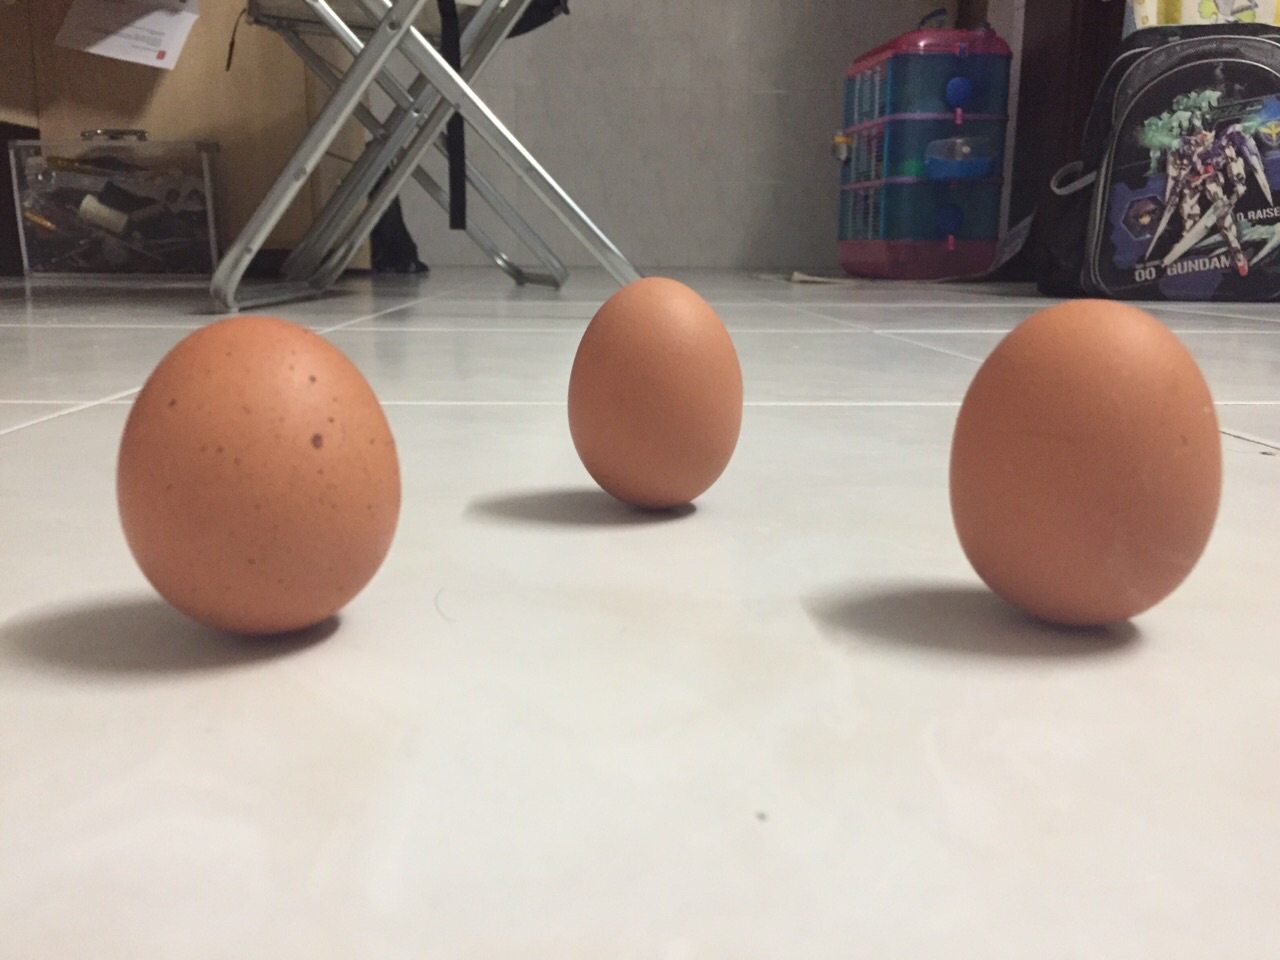 eggs can stand